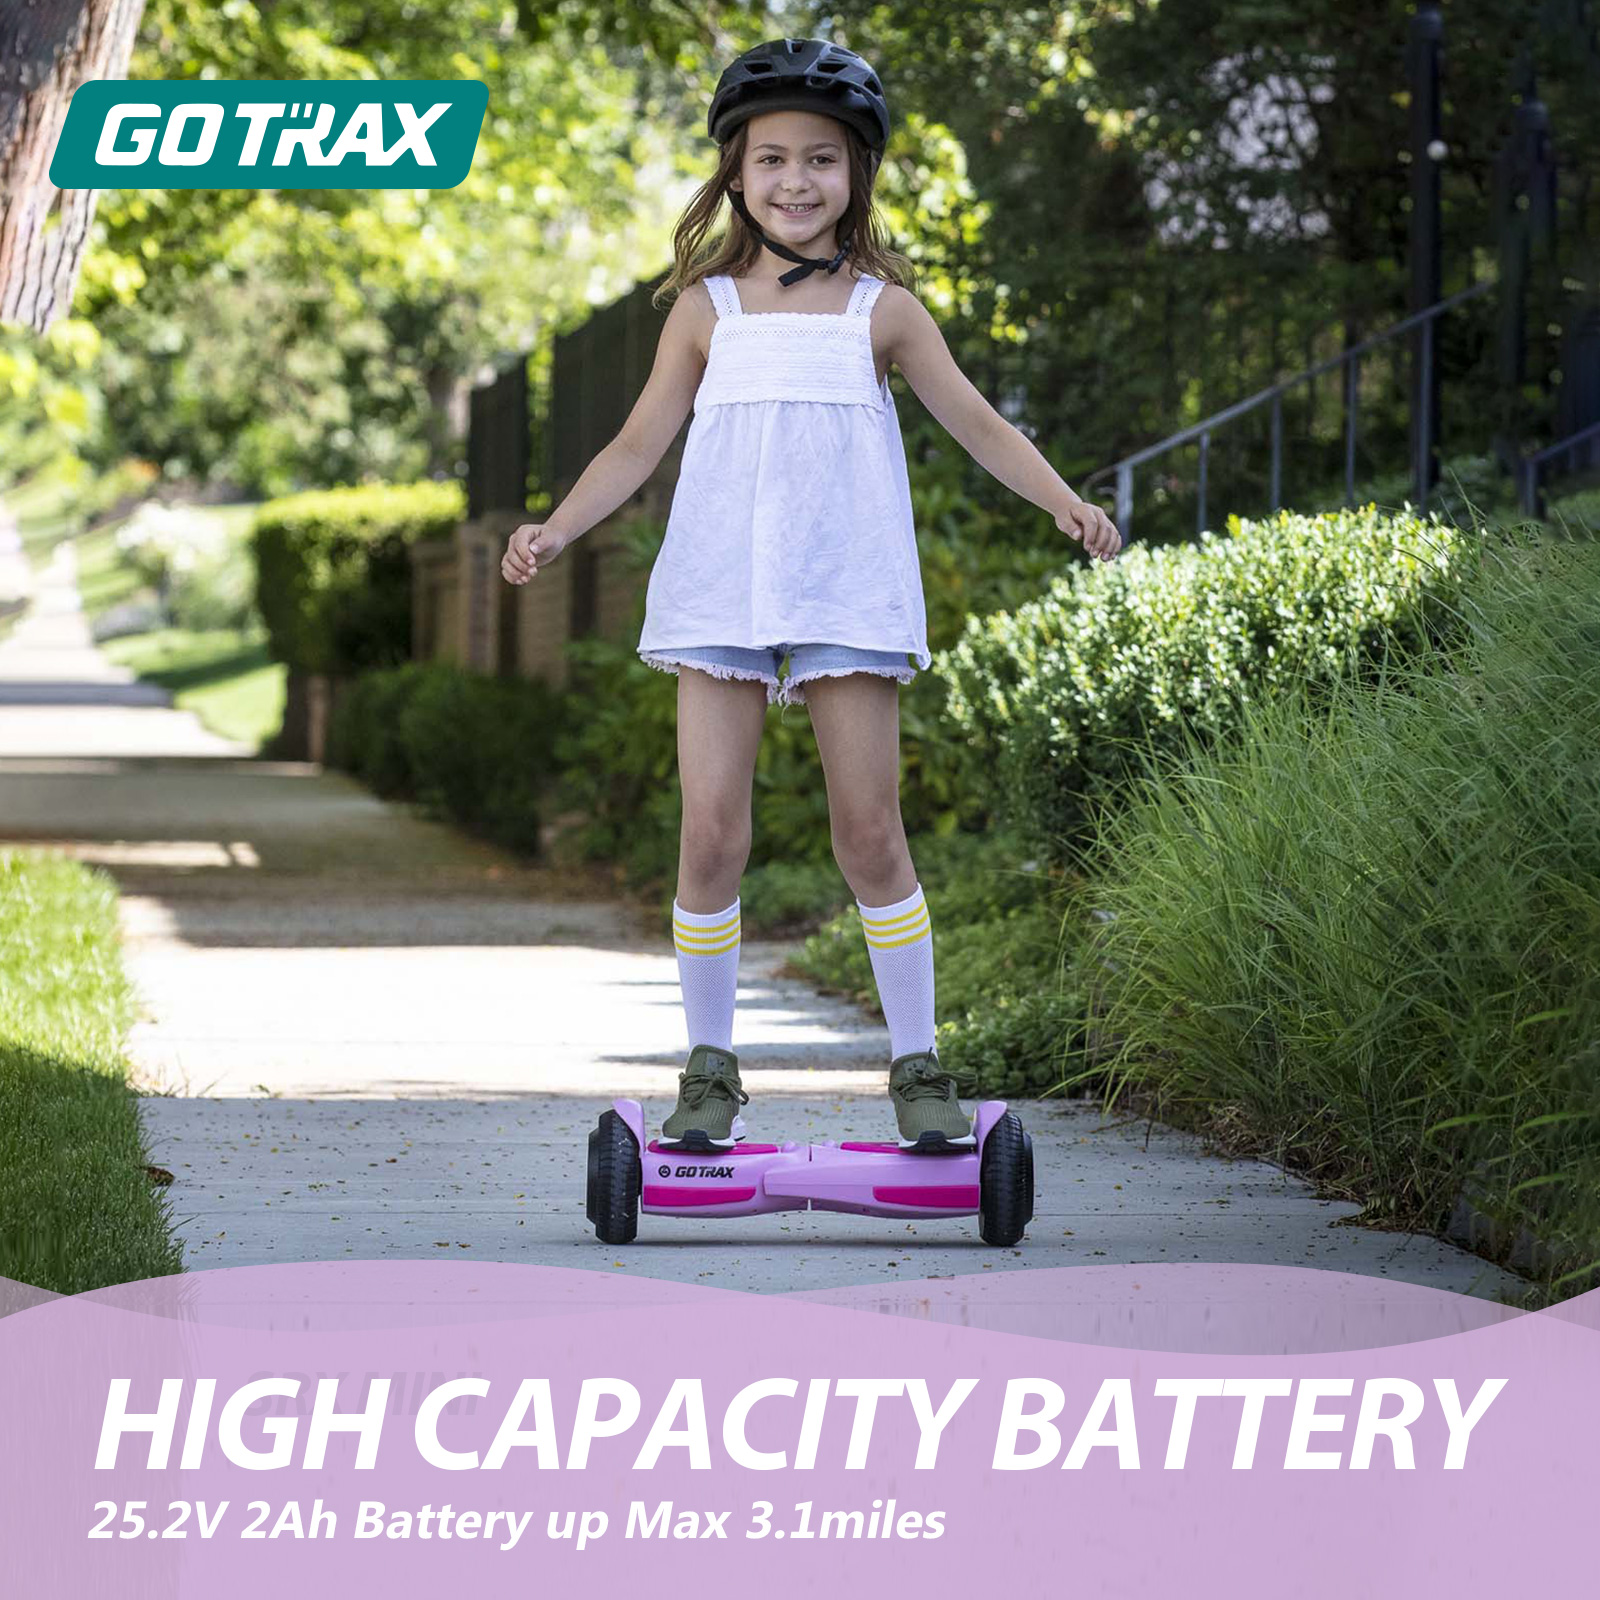 GOTRAX SRX Mini Hoverboard for Kids 6-12, 6.5" Wheels 150W Motor up to 5 mph Hover Boards Black - image 5 of 12